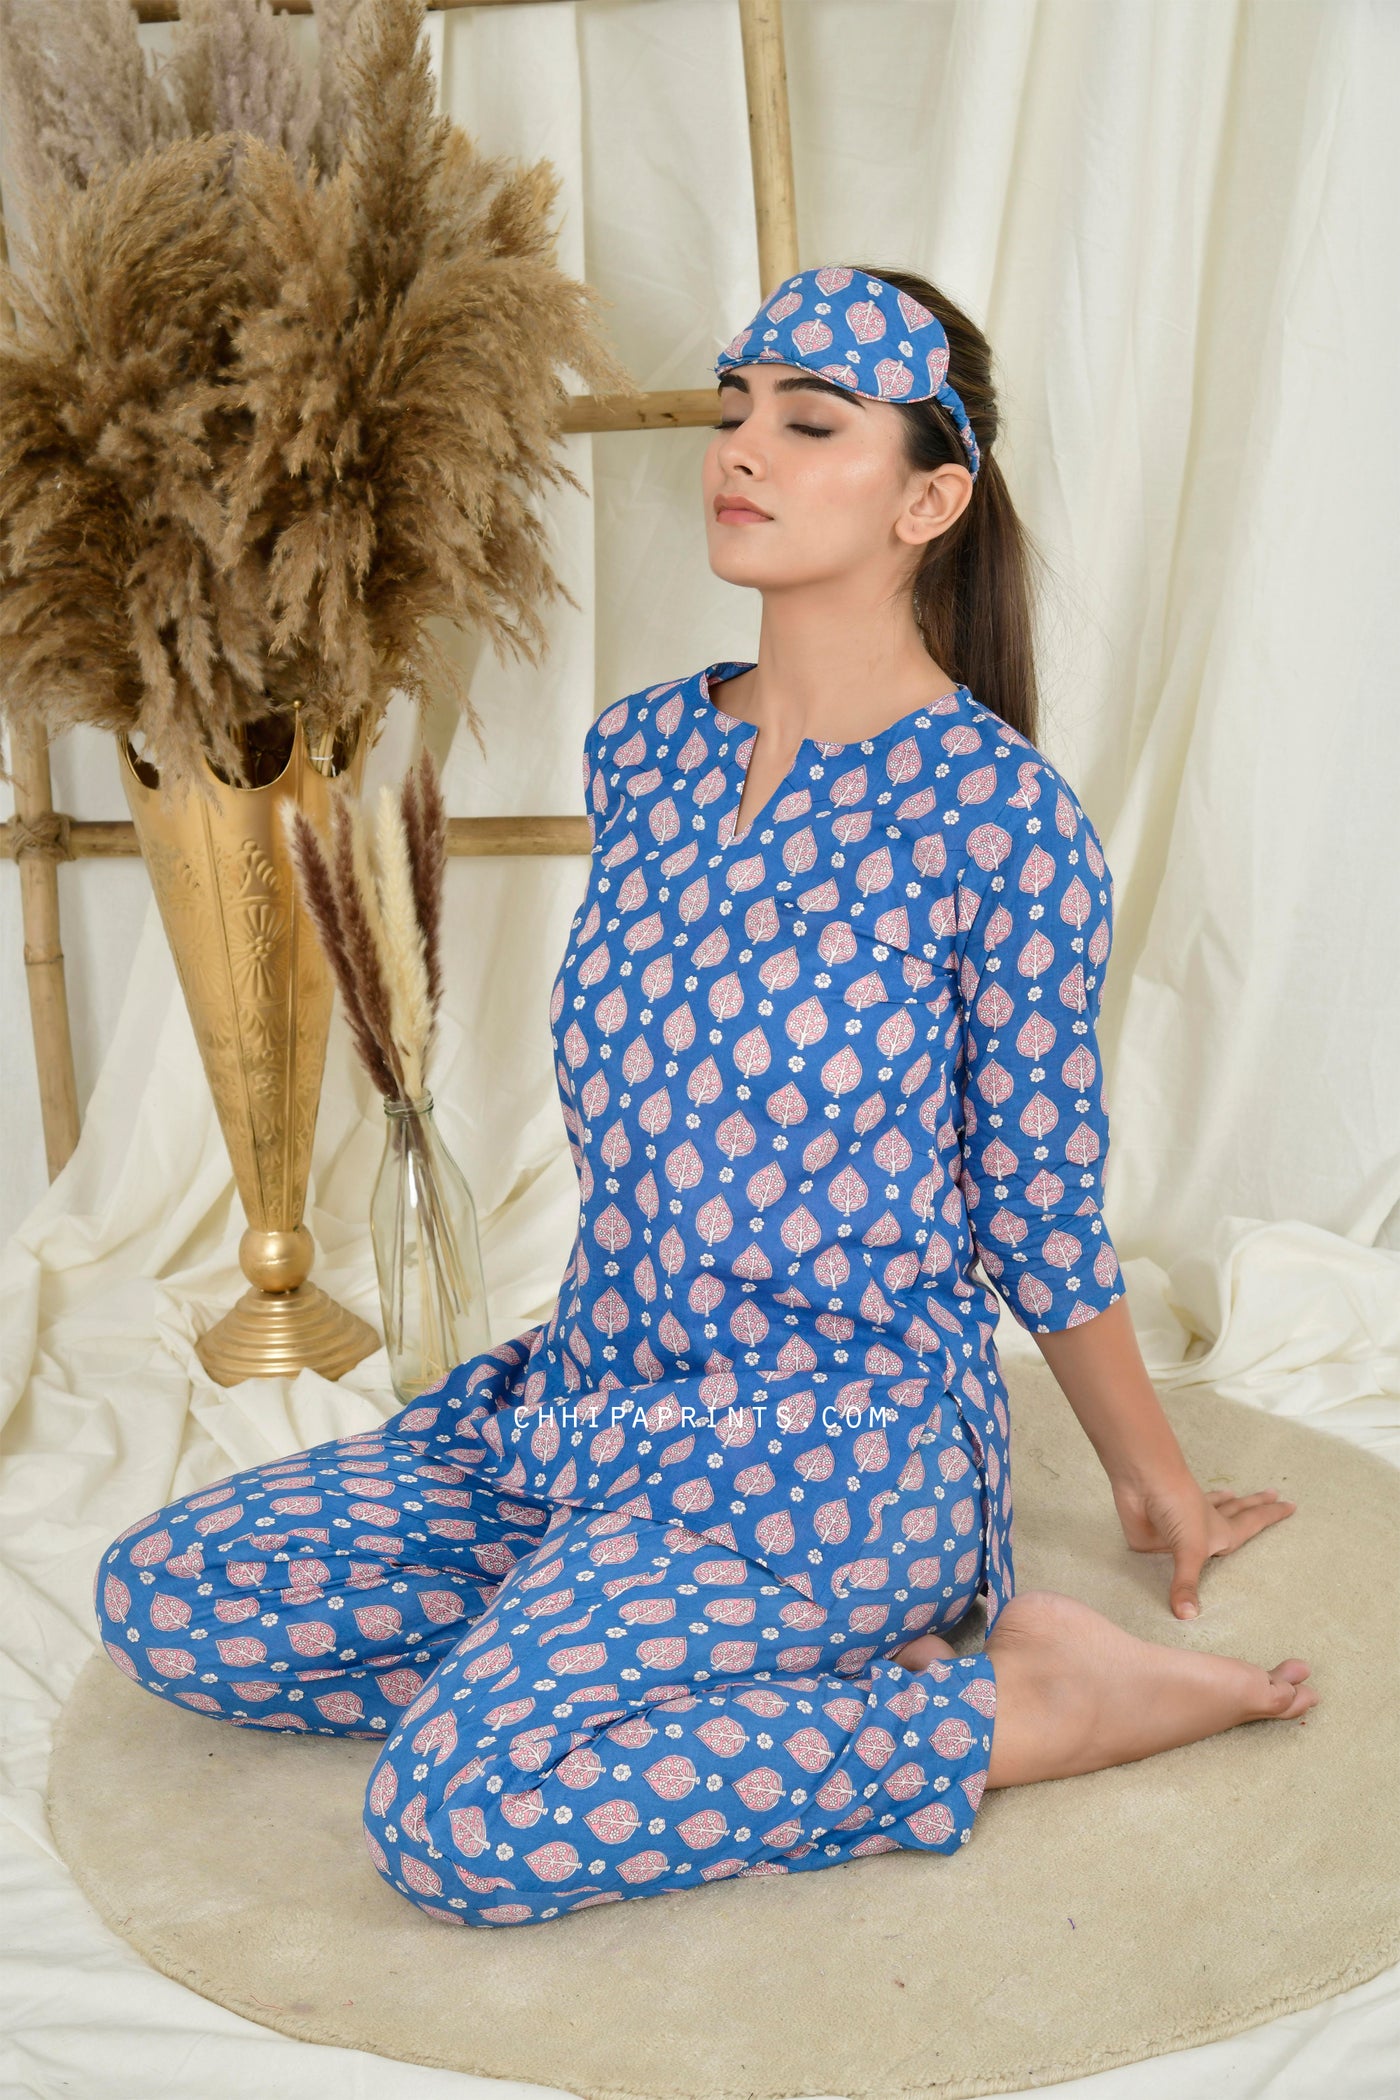 Cotton Buti Print Night Suit with Eye Mask in Blue